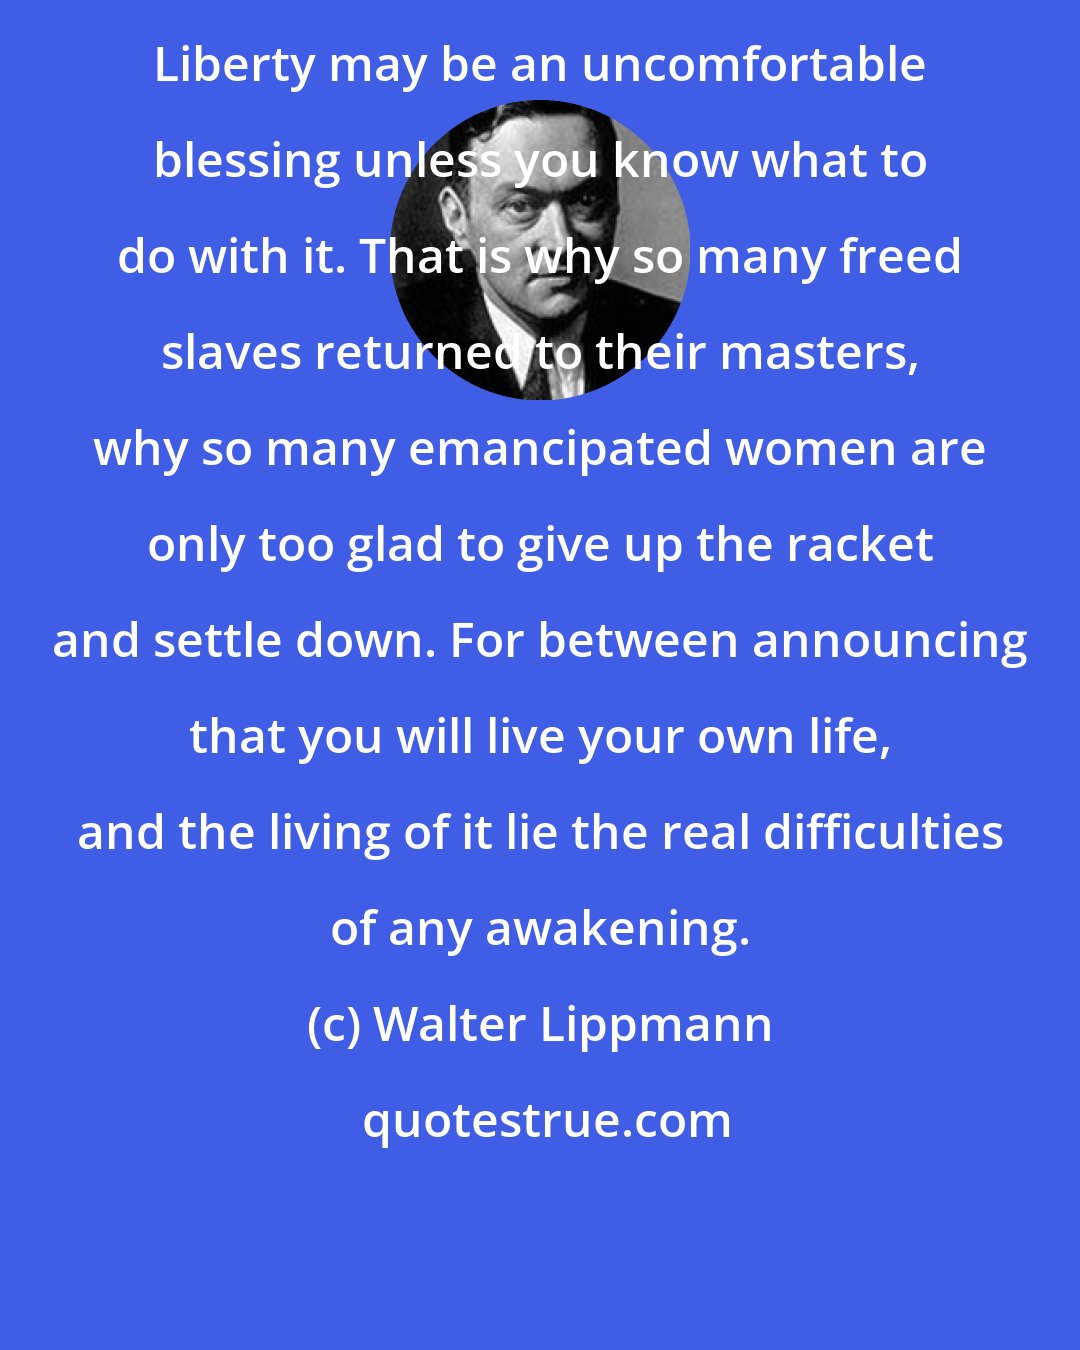 Walter Lippmann: Liberty may be an uncomfortable blessing unless you know what to do with it. That is why so many freed slaves returned to their masters, why so many emancipated women are only too glad to give up the racket and settle down. For between announcing that you will live your own life, and the living of it lie the real difficulties of any awakening.